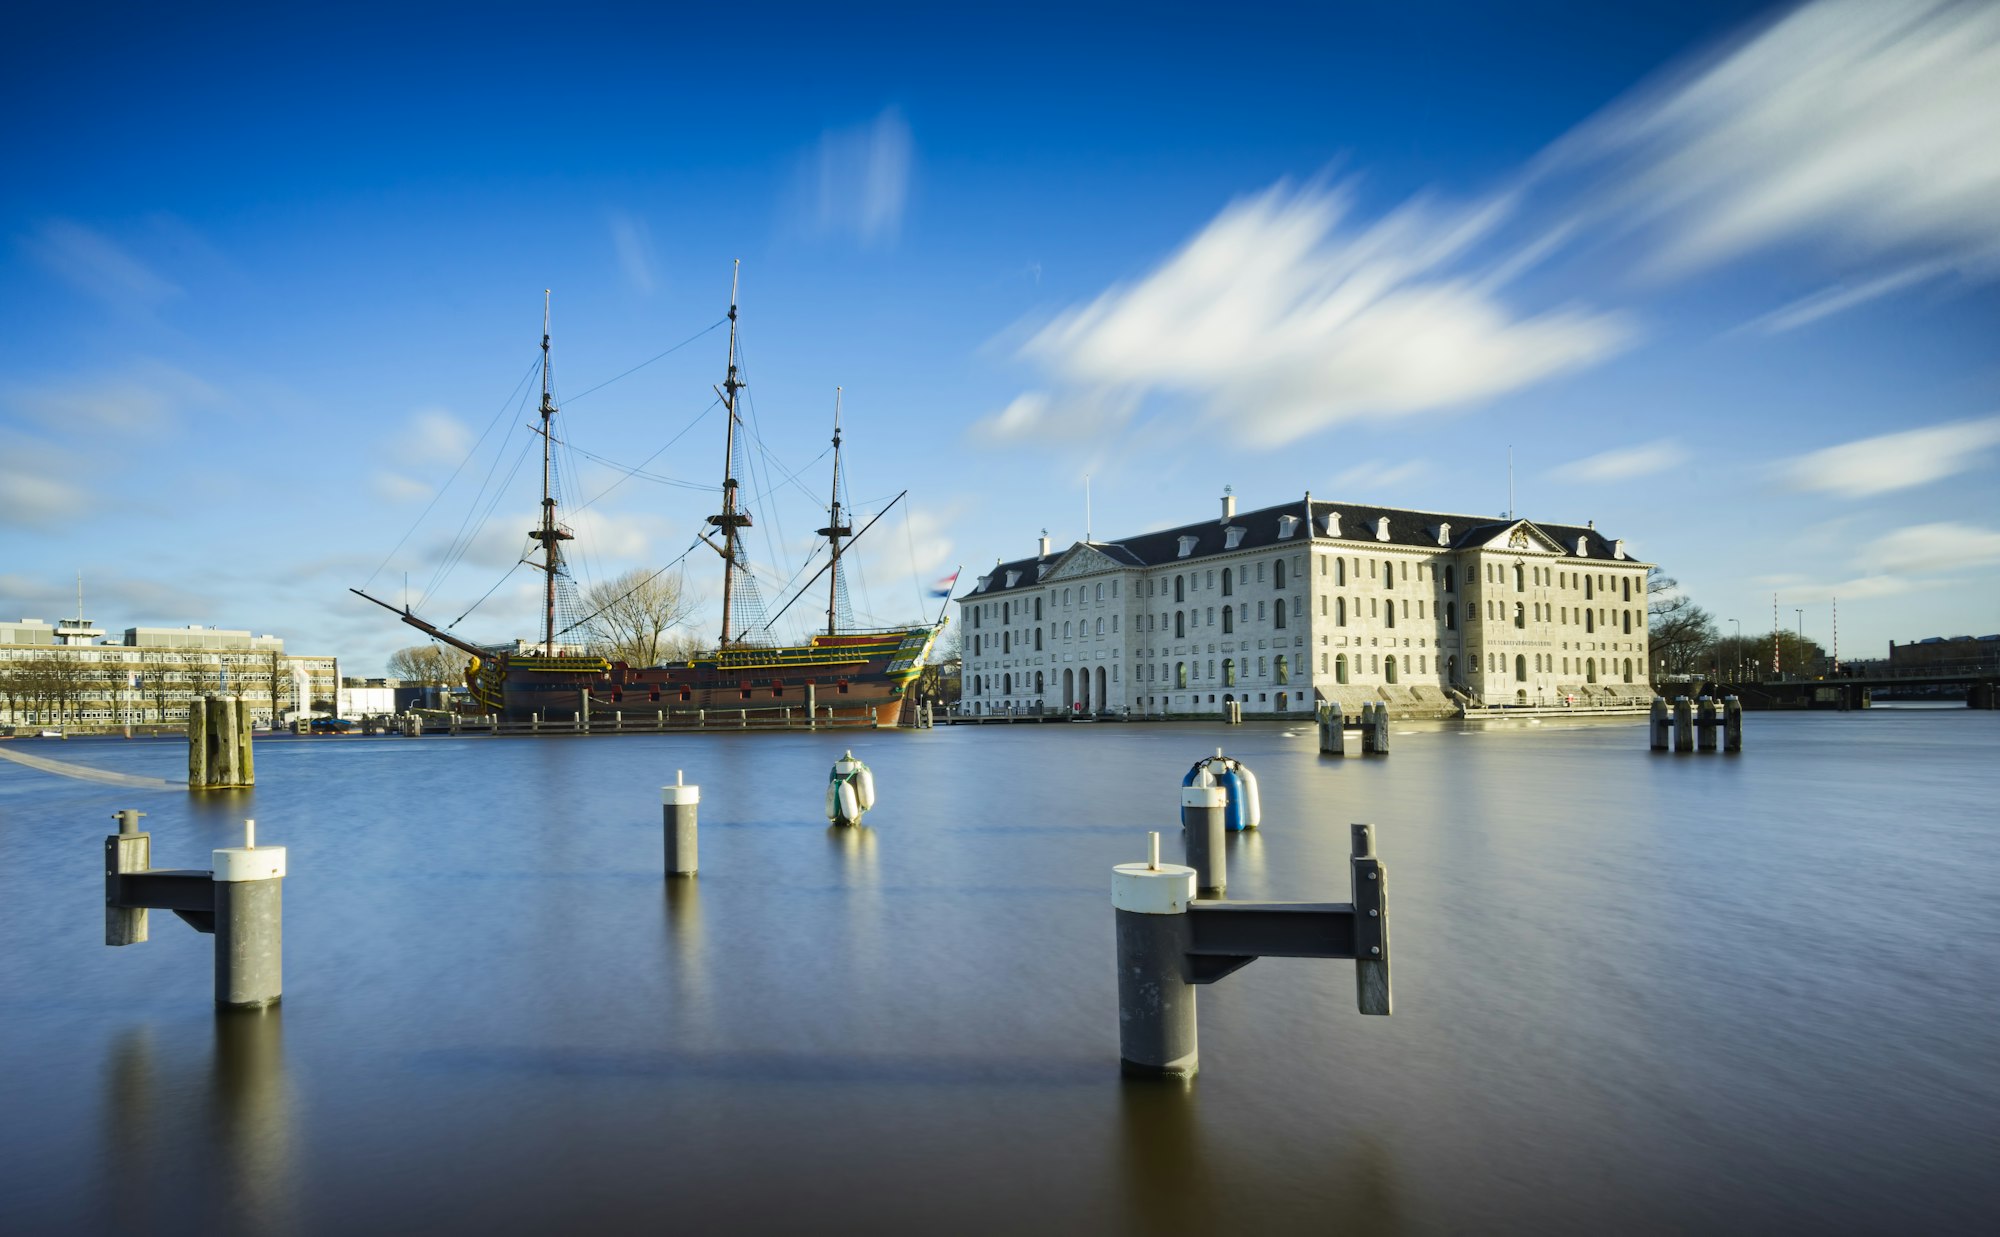 Maritime scene with pilings in foreground, colonial architecture, and sailing ship.